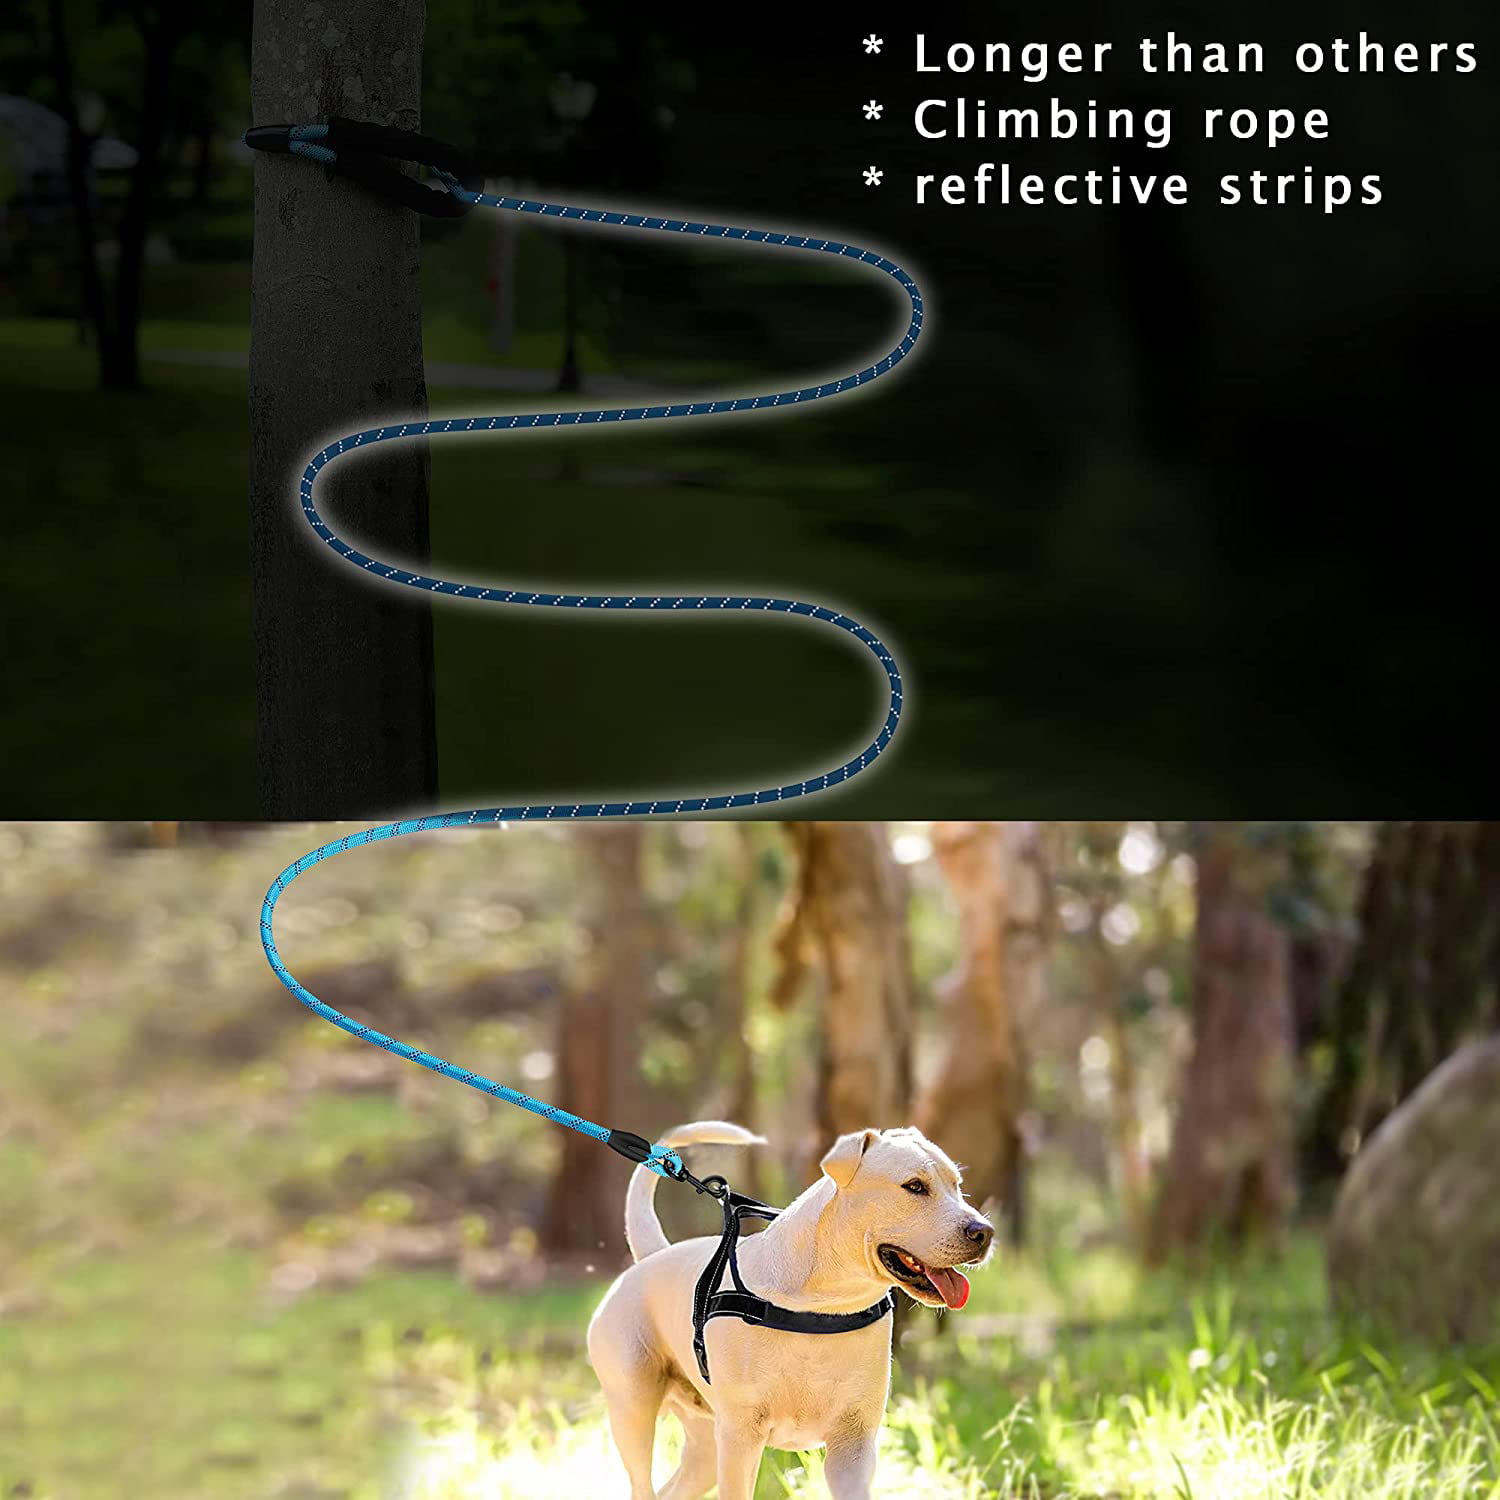 Comfortable Padded Handle Strong No Glue Plastic Buckle,Leashes for Medium Dogs,Small Dogs 13.1Ft Long Leash for Dog Training,INTINI Leashes for Large Breed Dogs with Nylon Rope Highly Reflective 